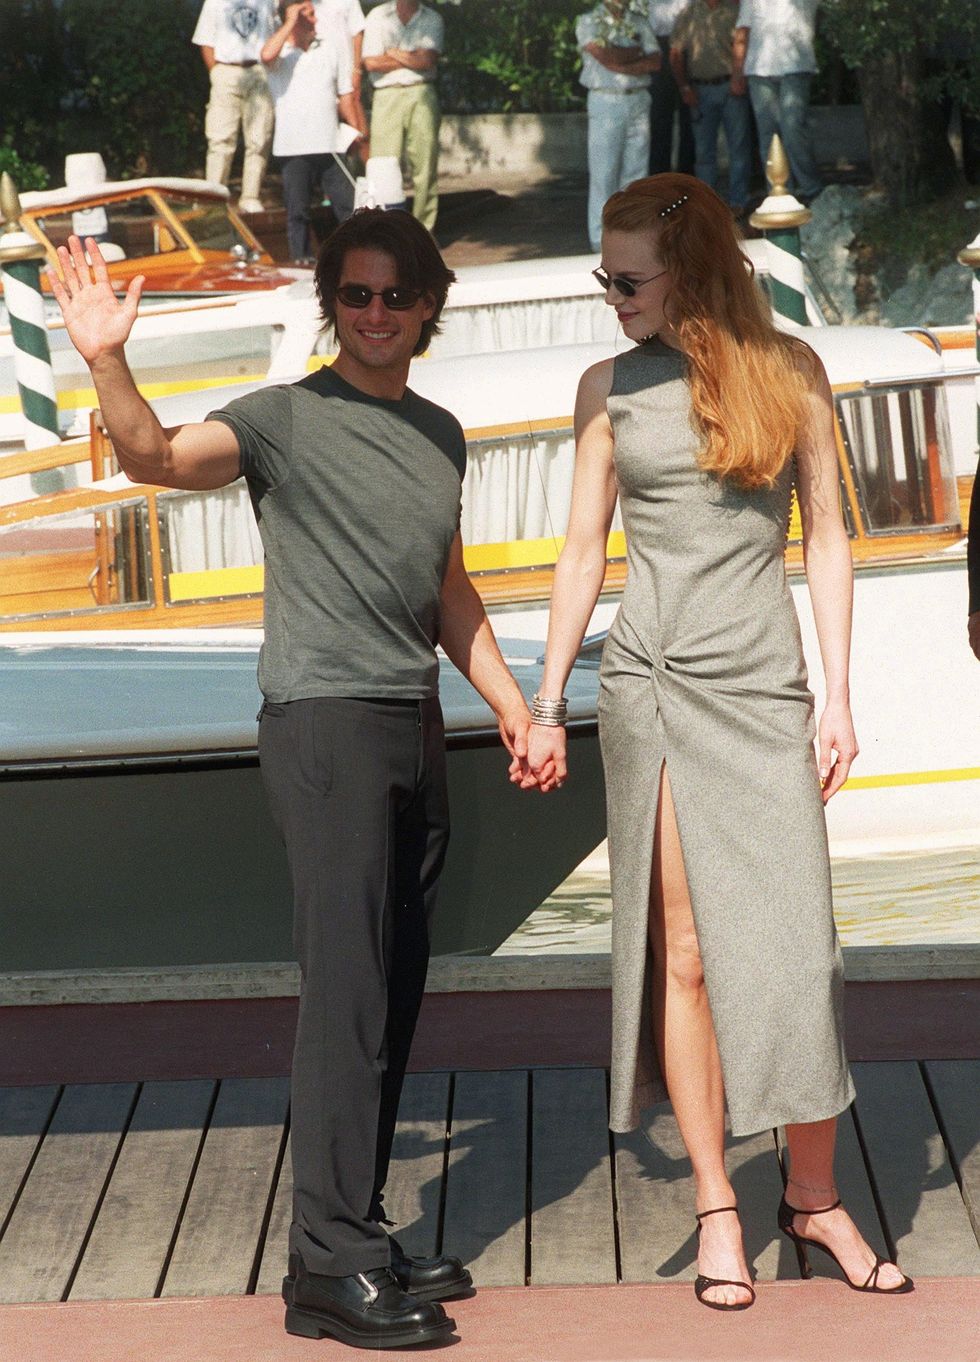 italy   september 01  venice film festival arrival of tom cruise and nicole kidman in venice, italia on september 01st , 1999  photo by eric vandevillegamma rapho via getty images